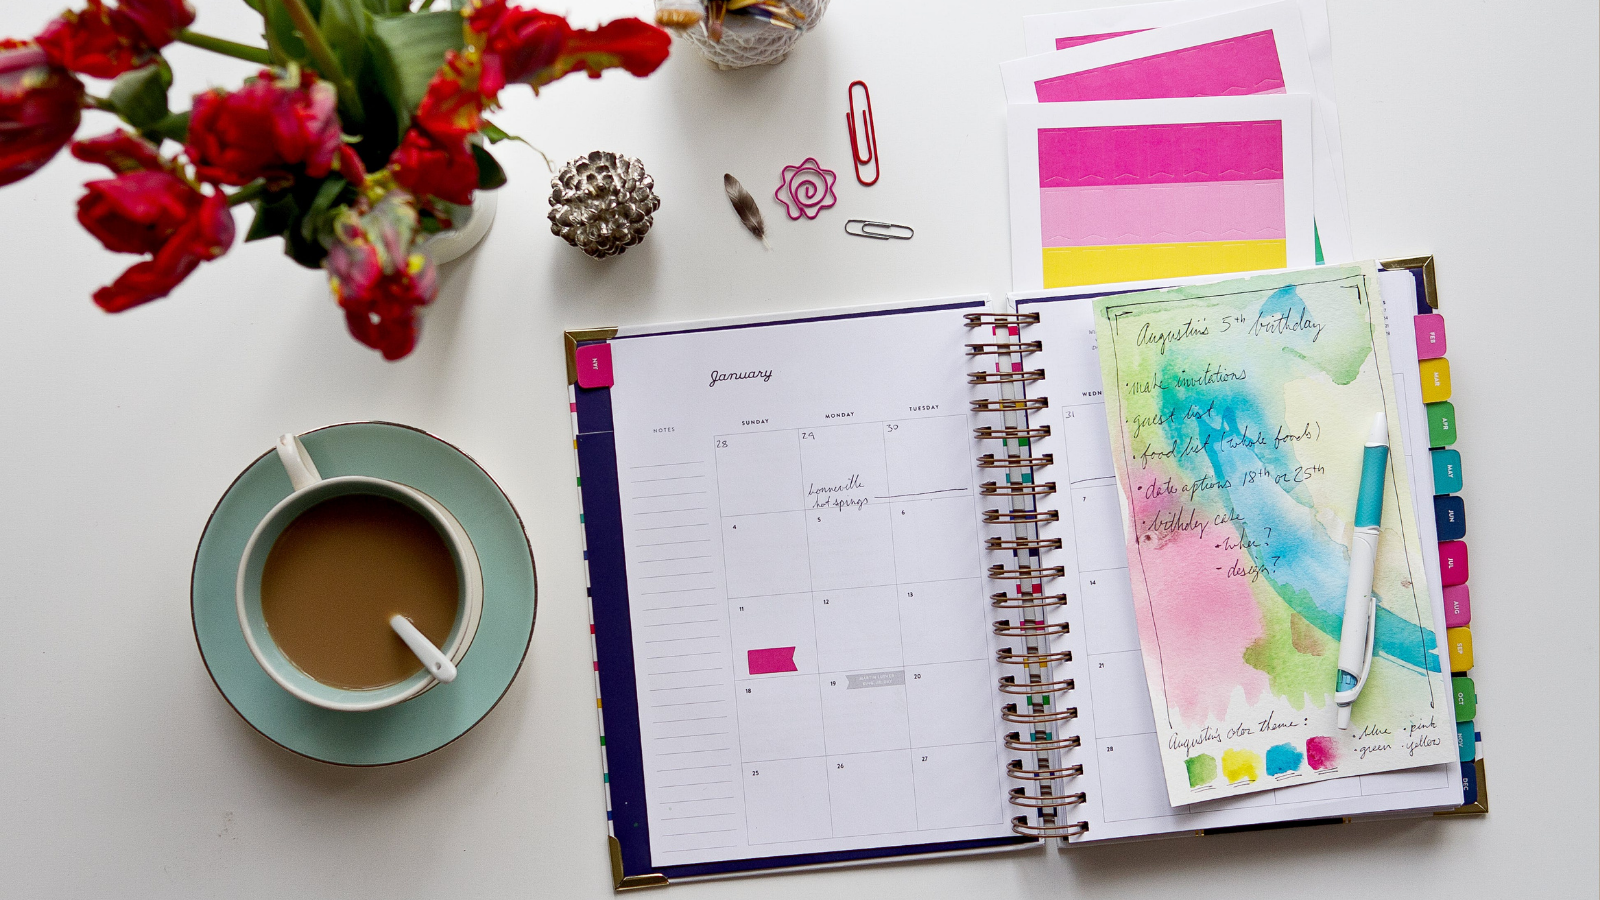 How To Organize Your Planner